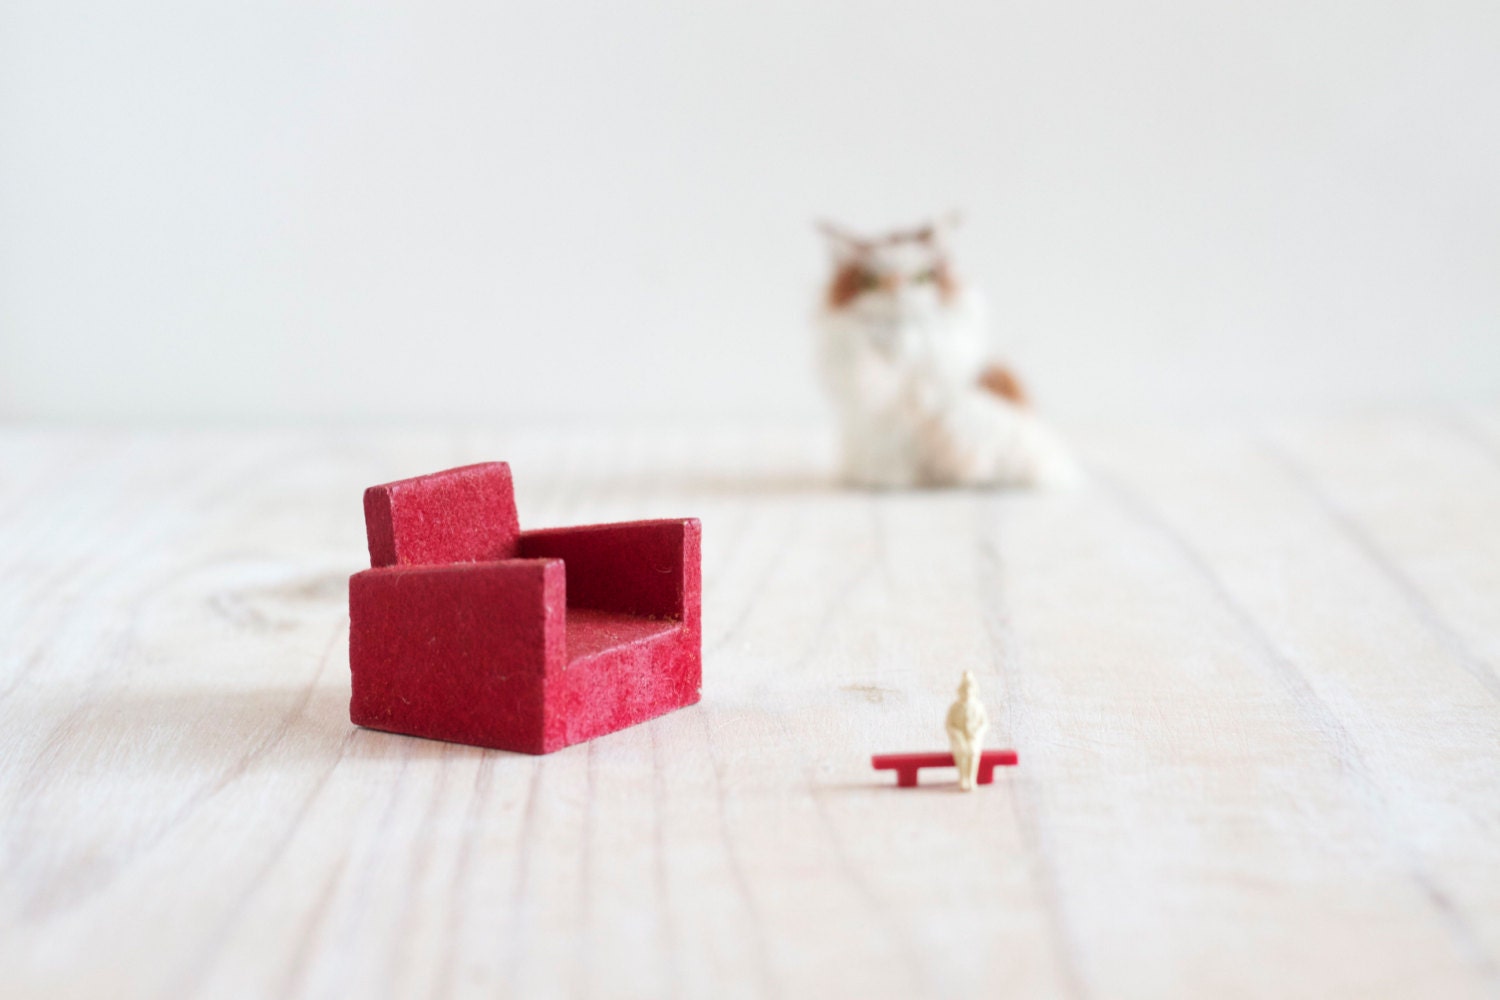 Teeny Weeny Vintage Red Arm Chair - Doll's House Miniature Living Room - MeangleanAlchemist